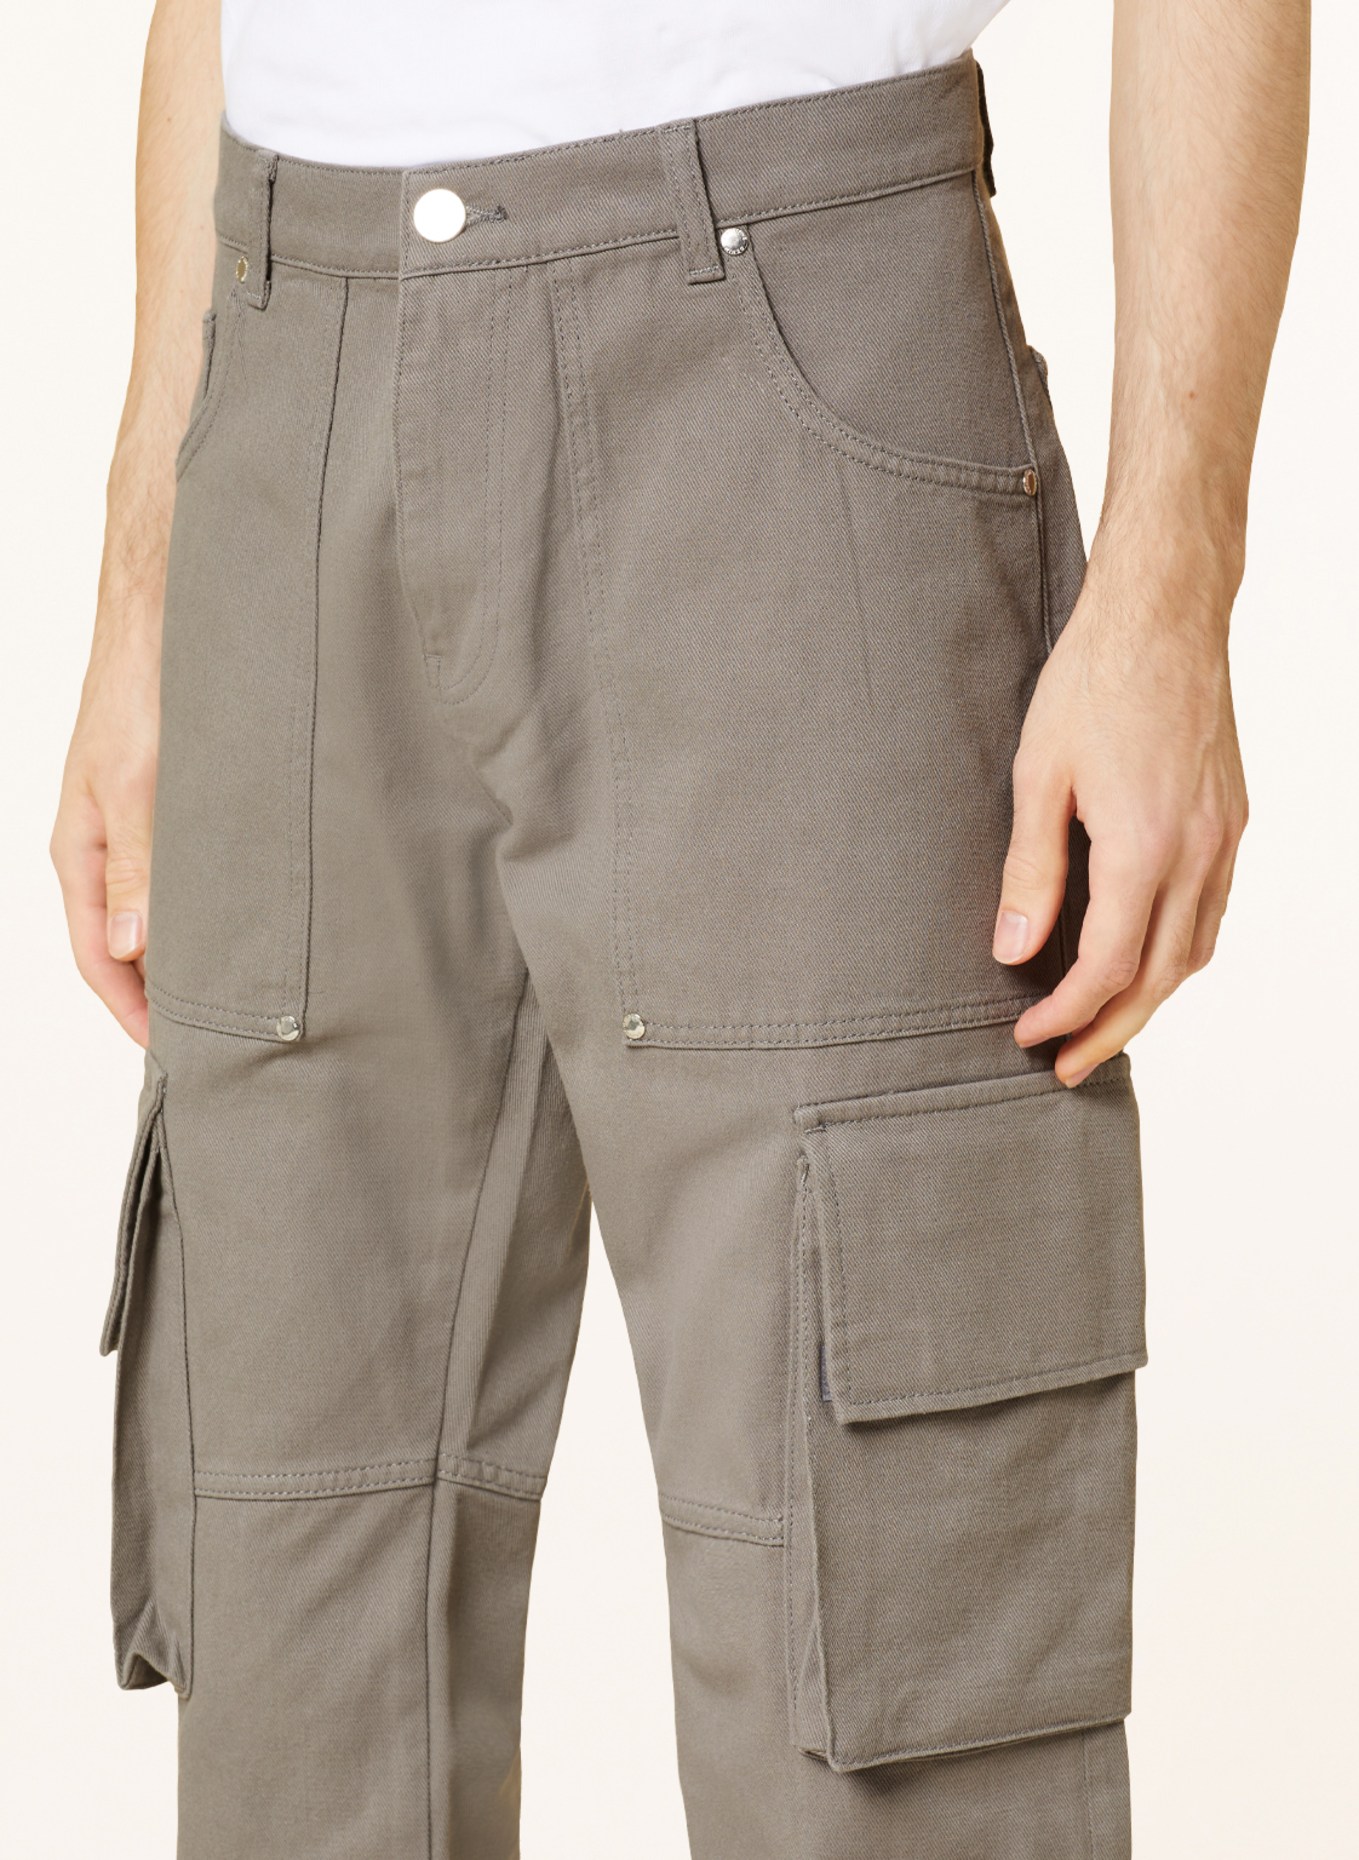 EIGHTYFIVE Cargo pants straight fit, Color: GRAY (Image 5)